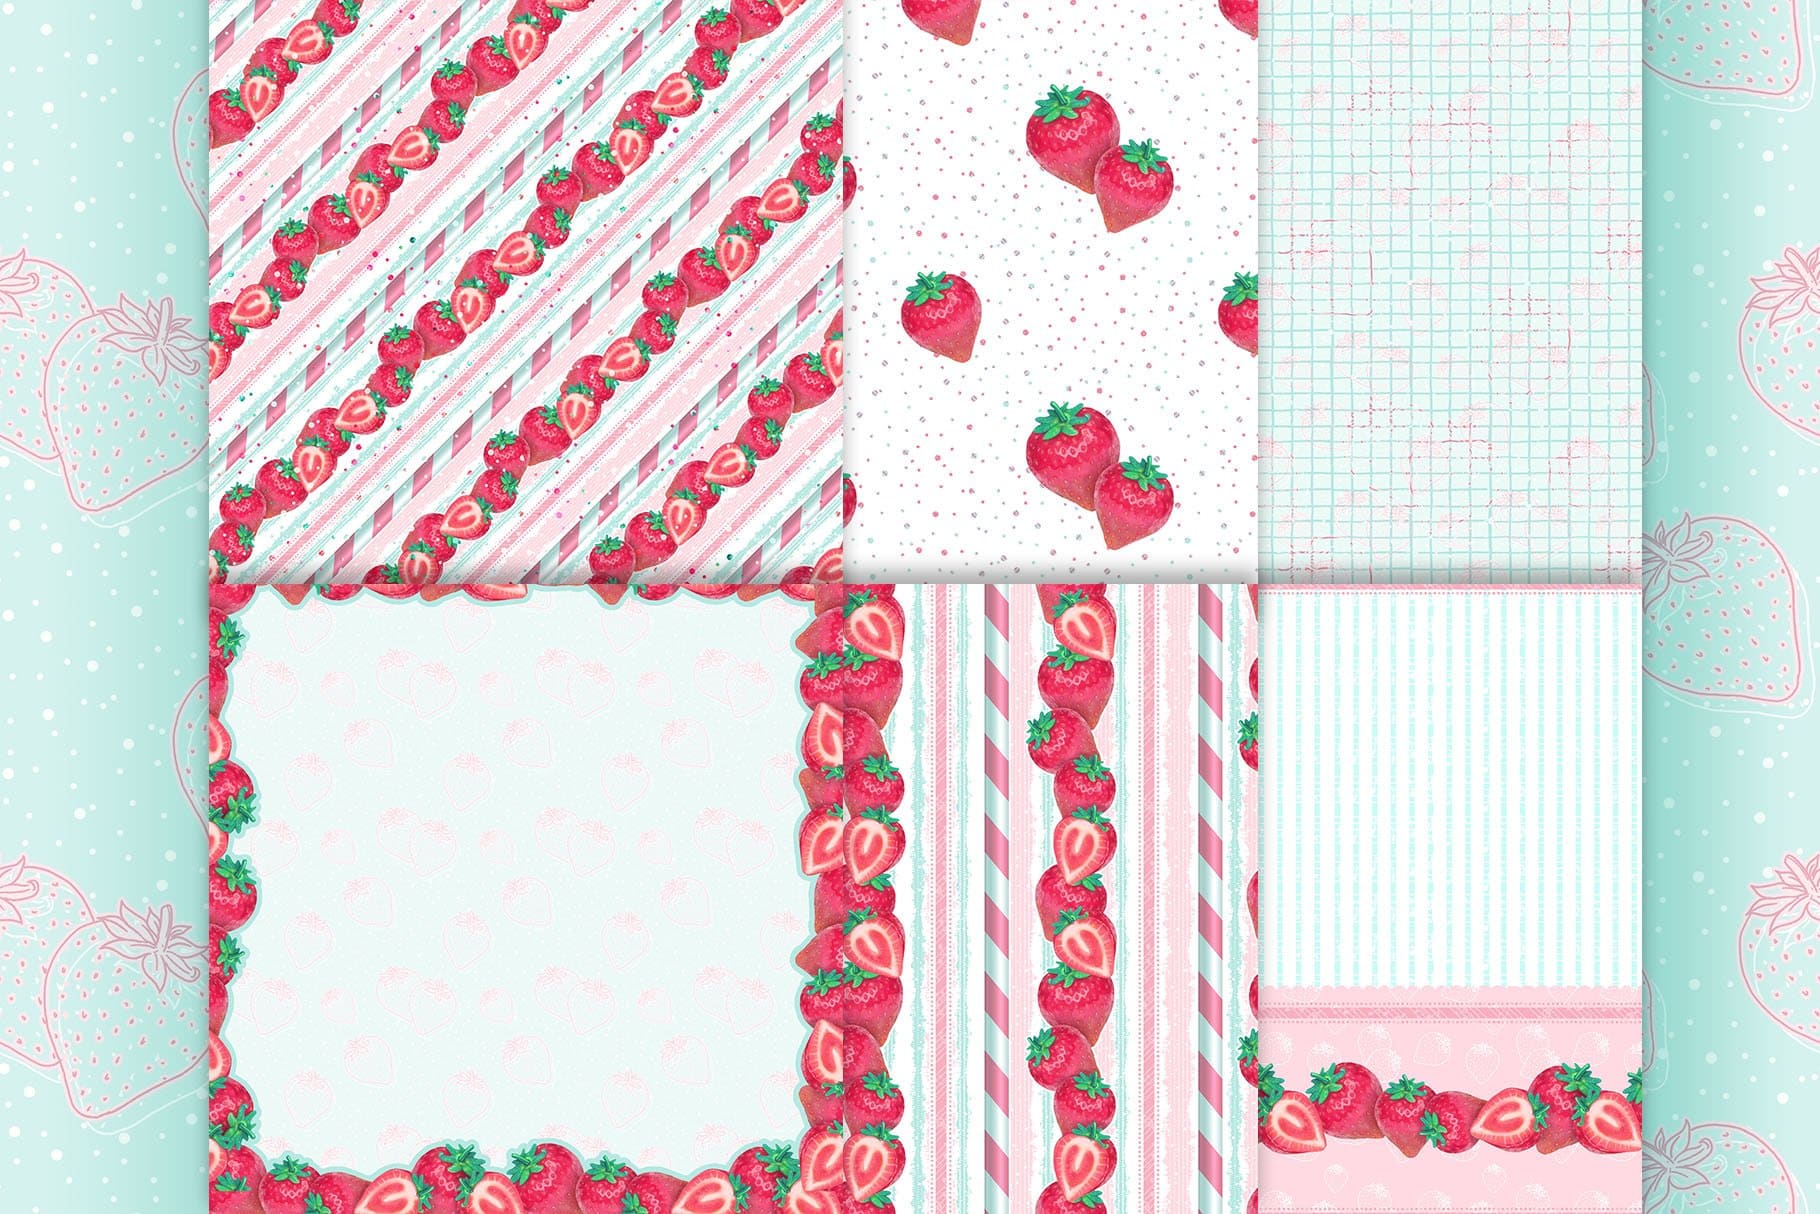 The print shows diagonal stripes consisting of strawberries.